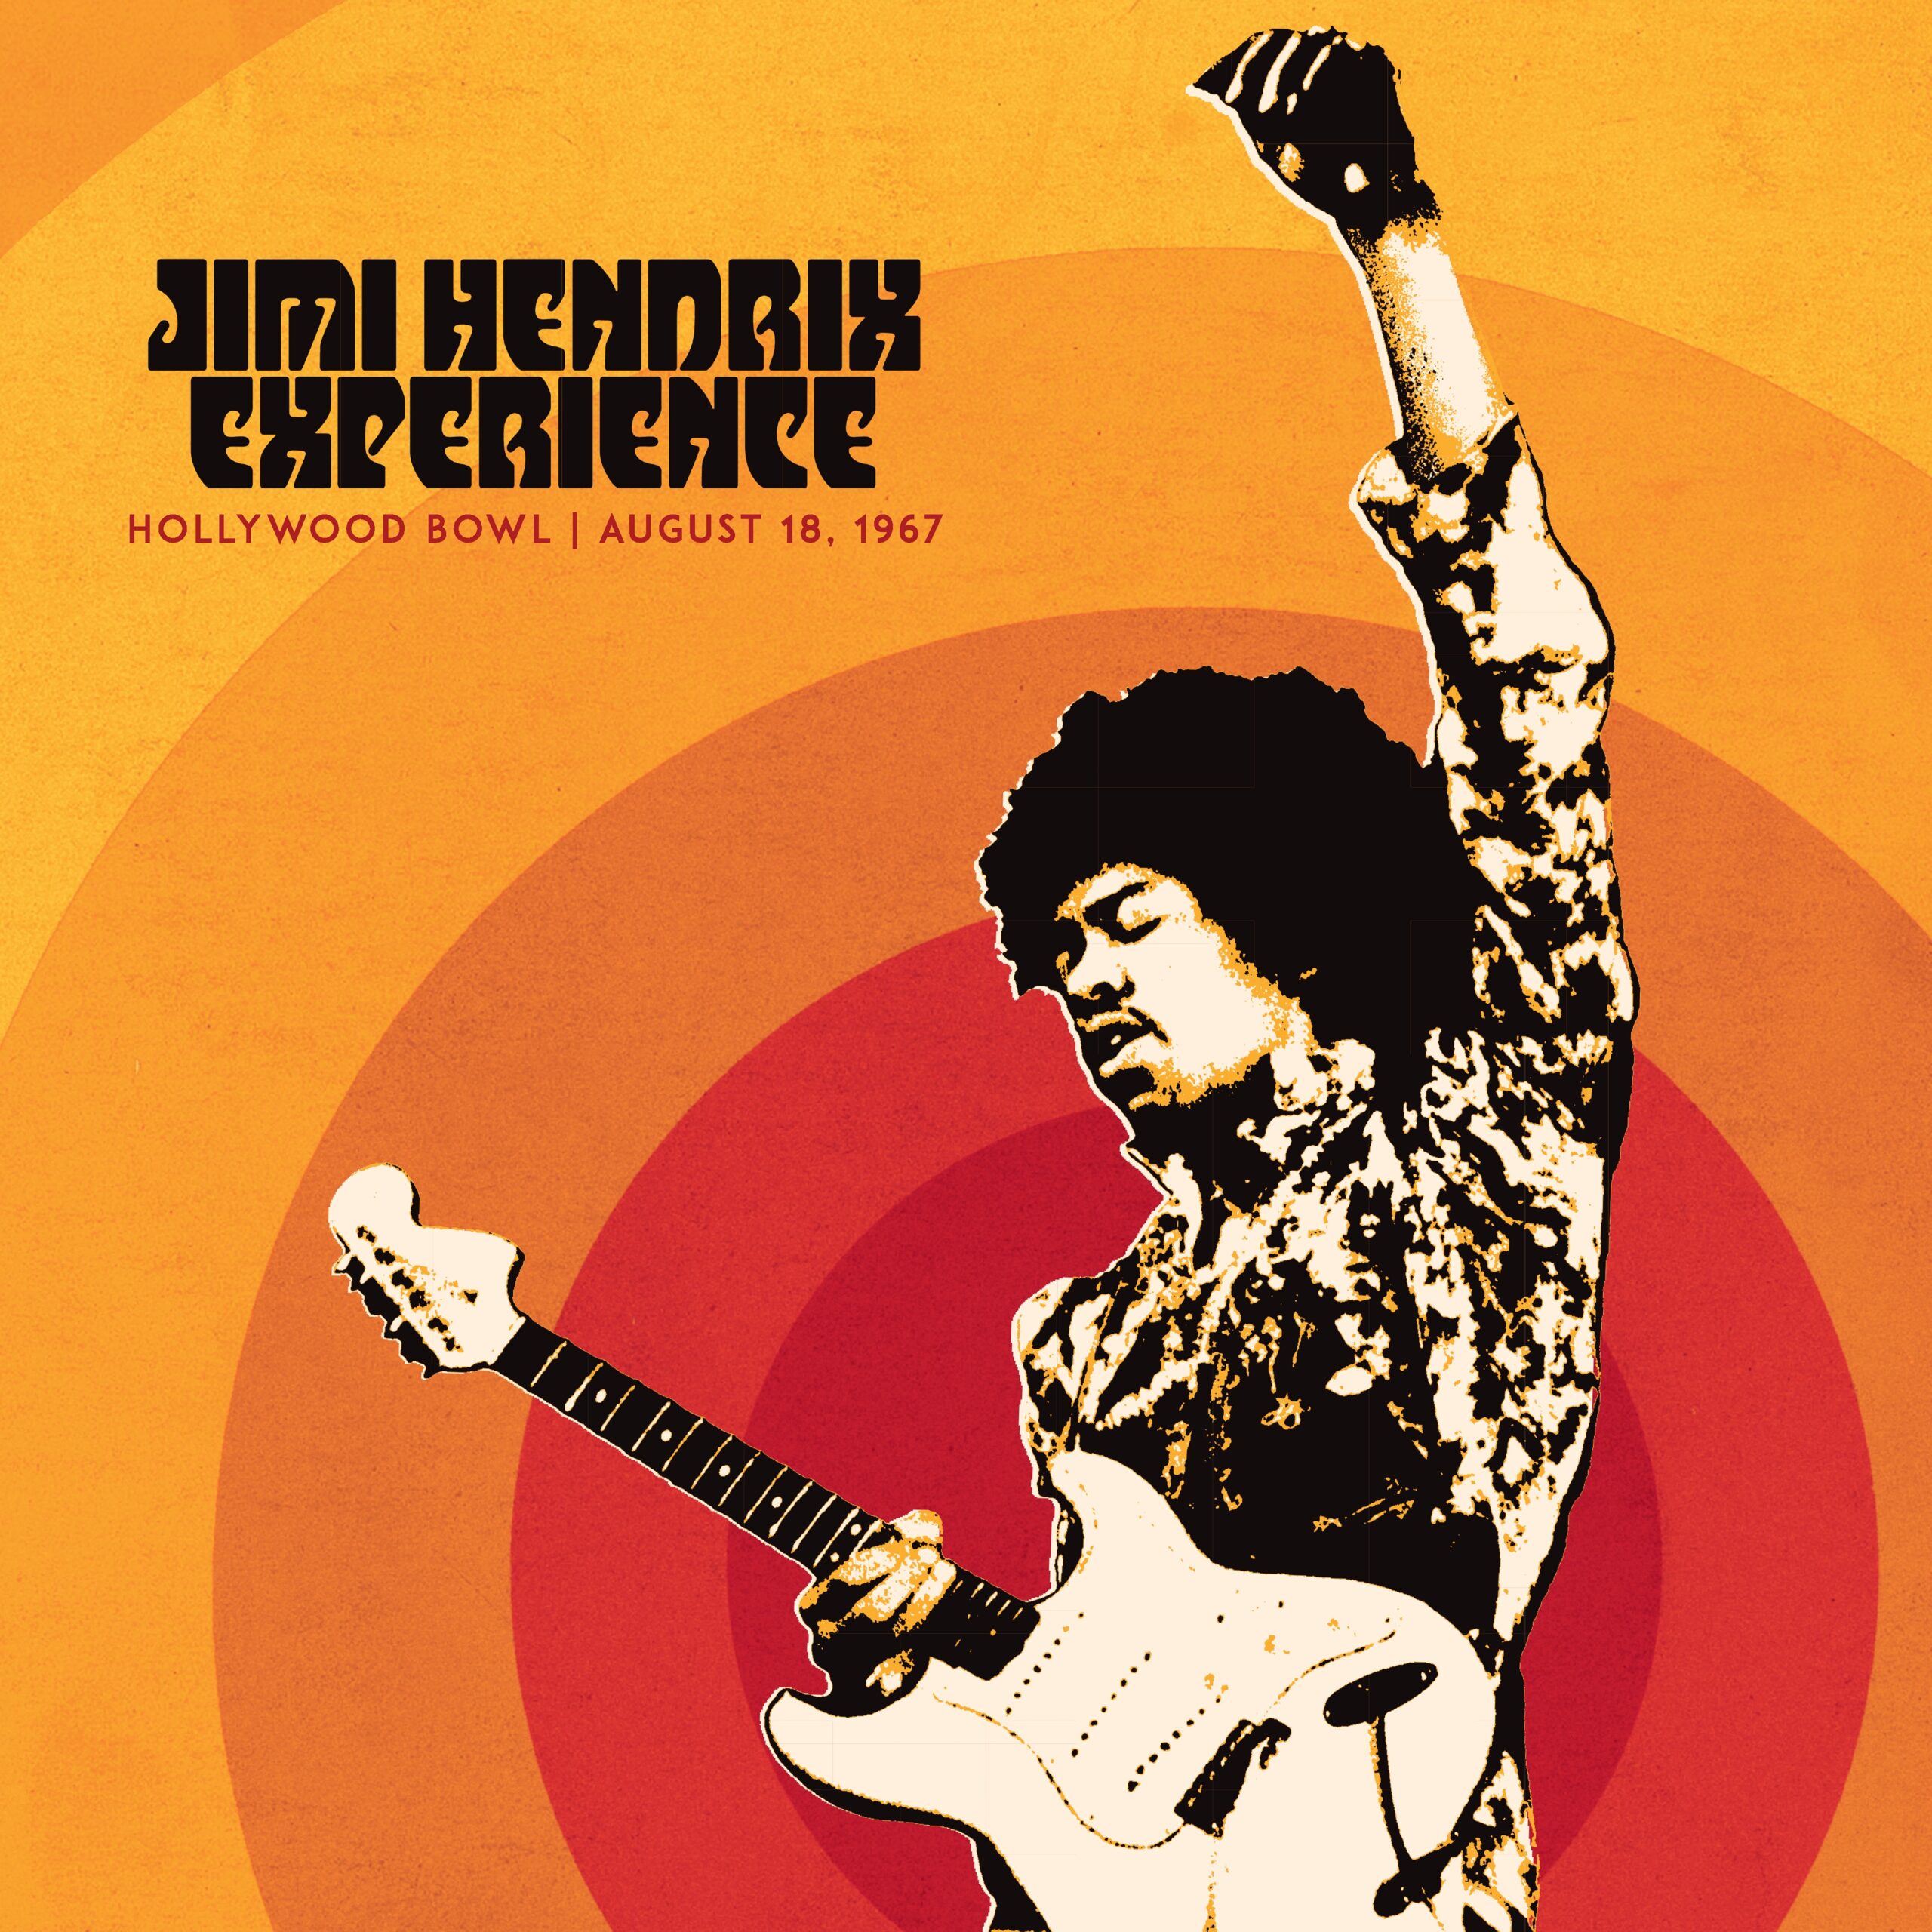 Jimi Hendrix Experience (USA) – Hollywood Bowl, August 18, 1967